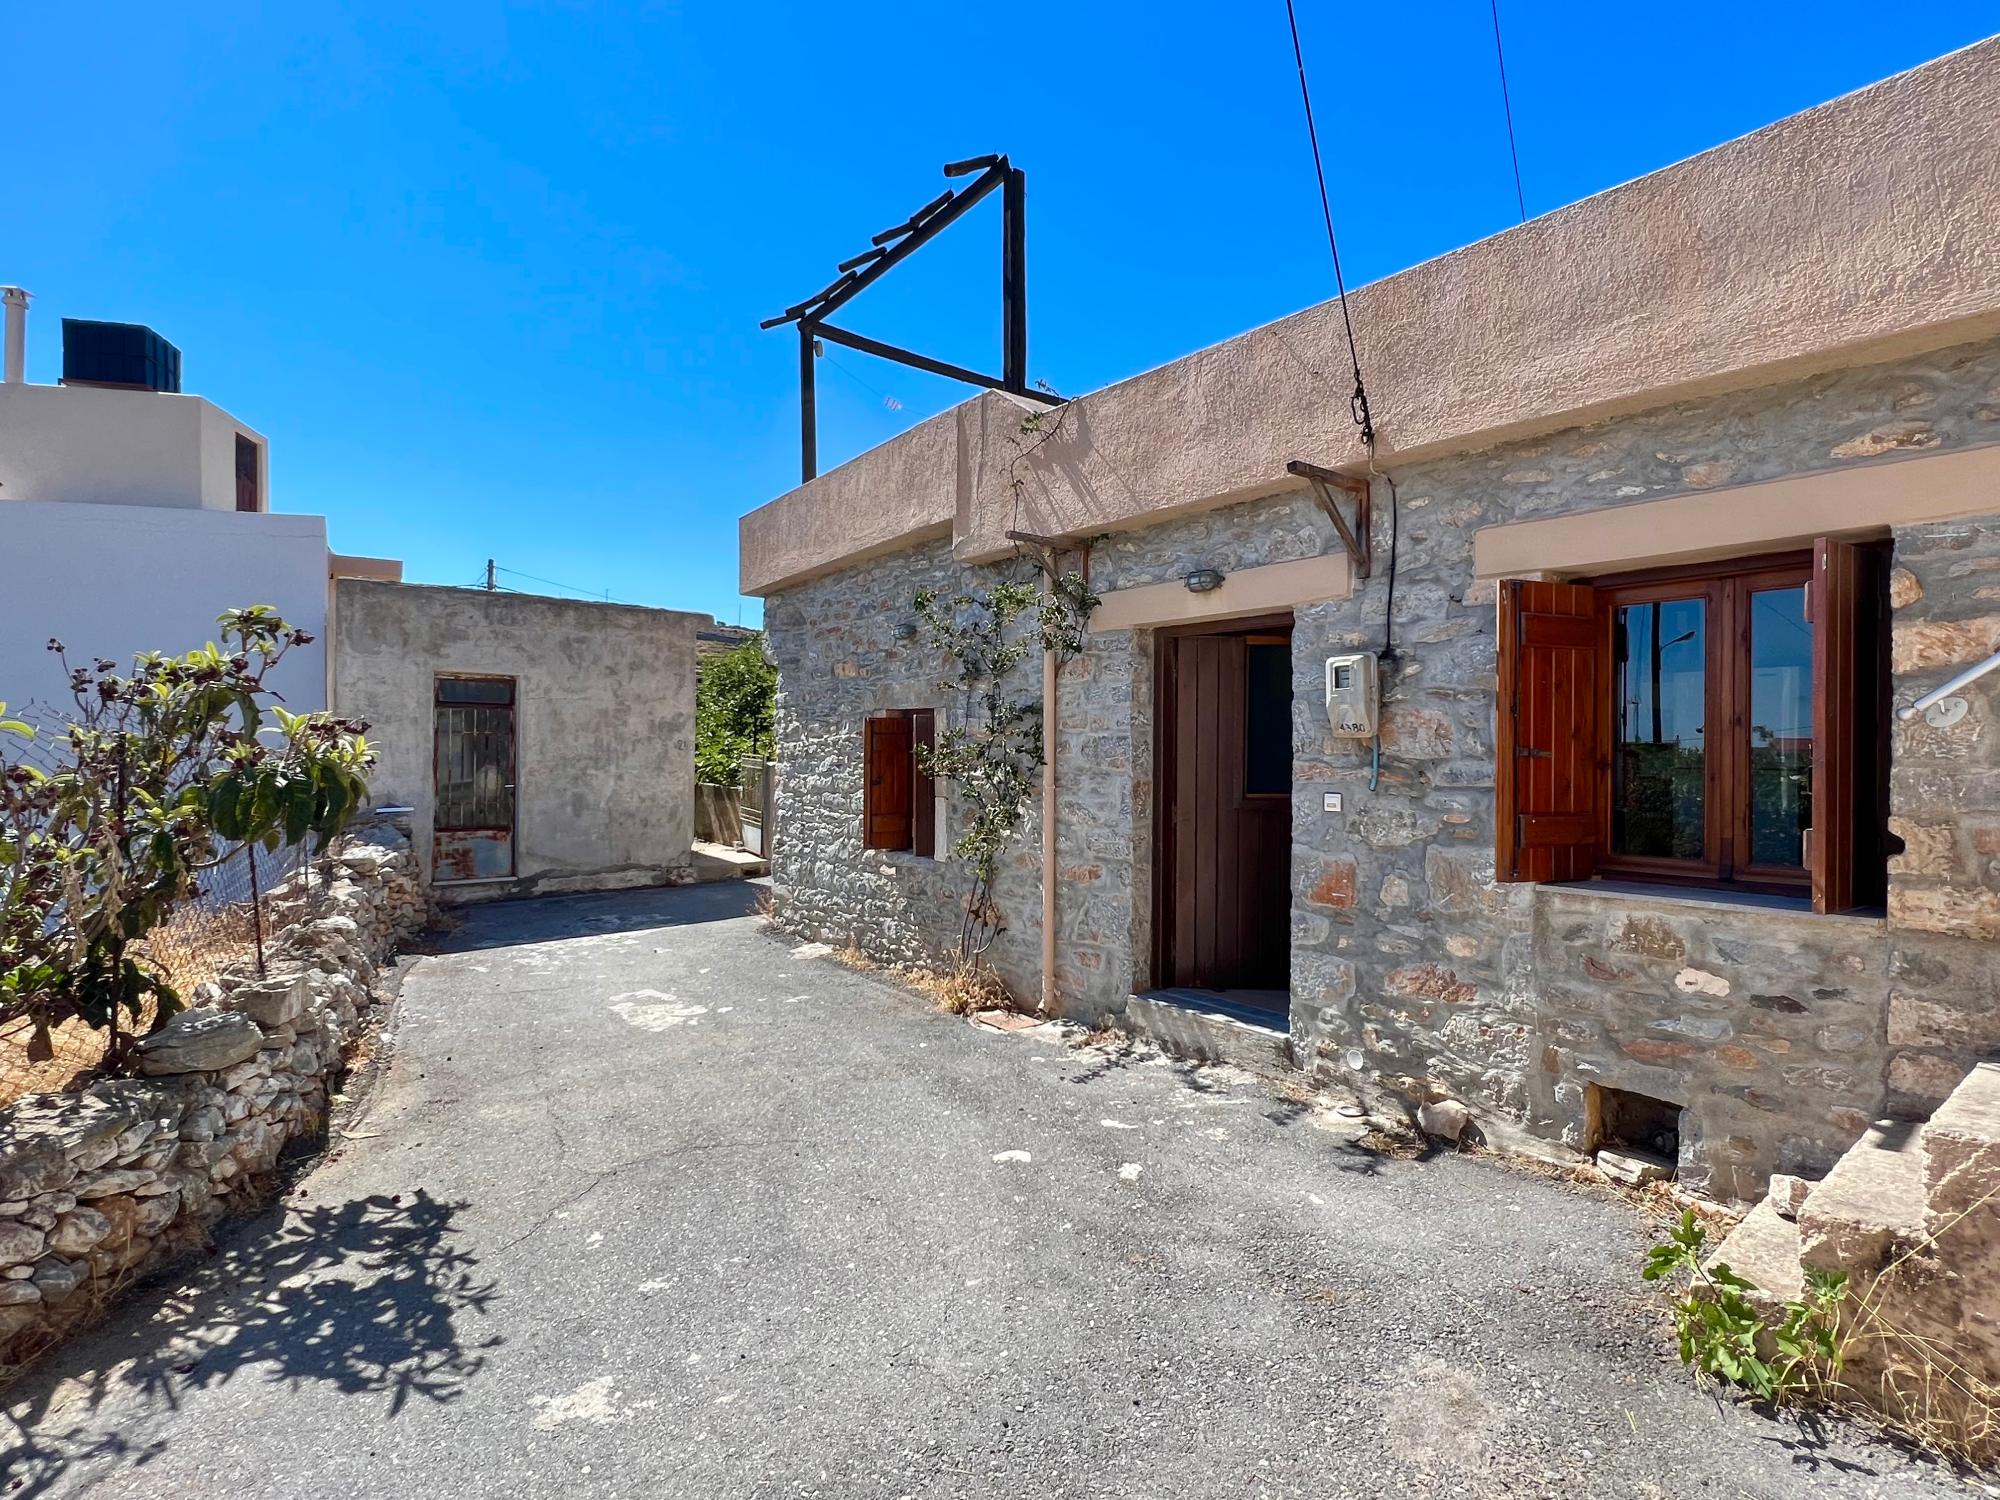 Cozy village stone house with roof terrace. Fully furnished.